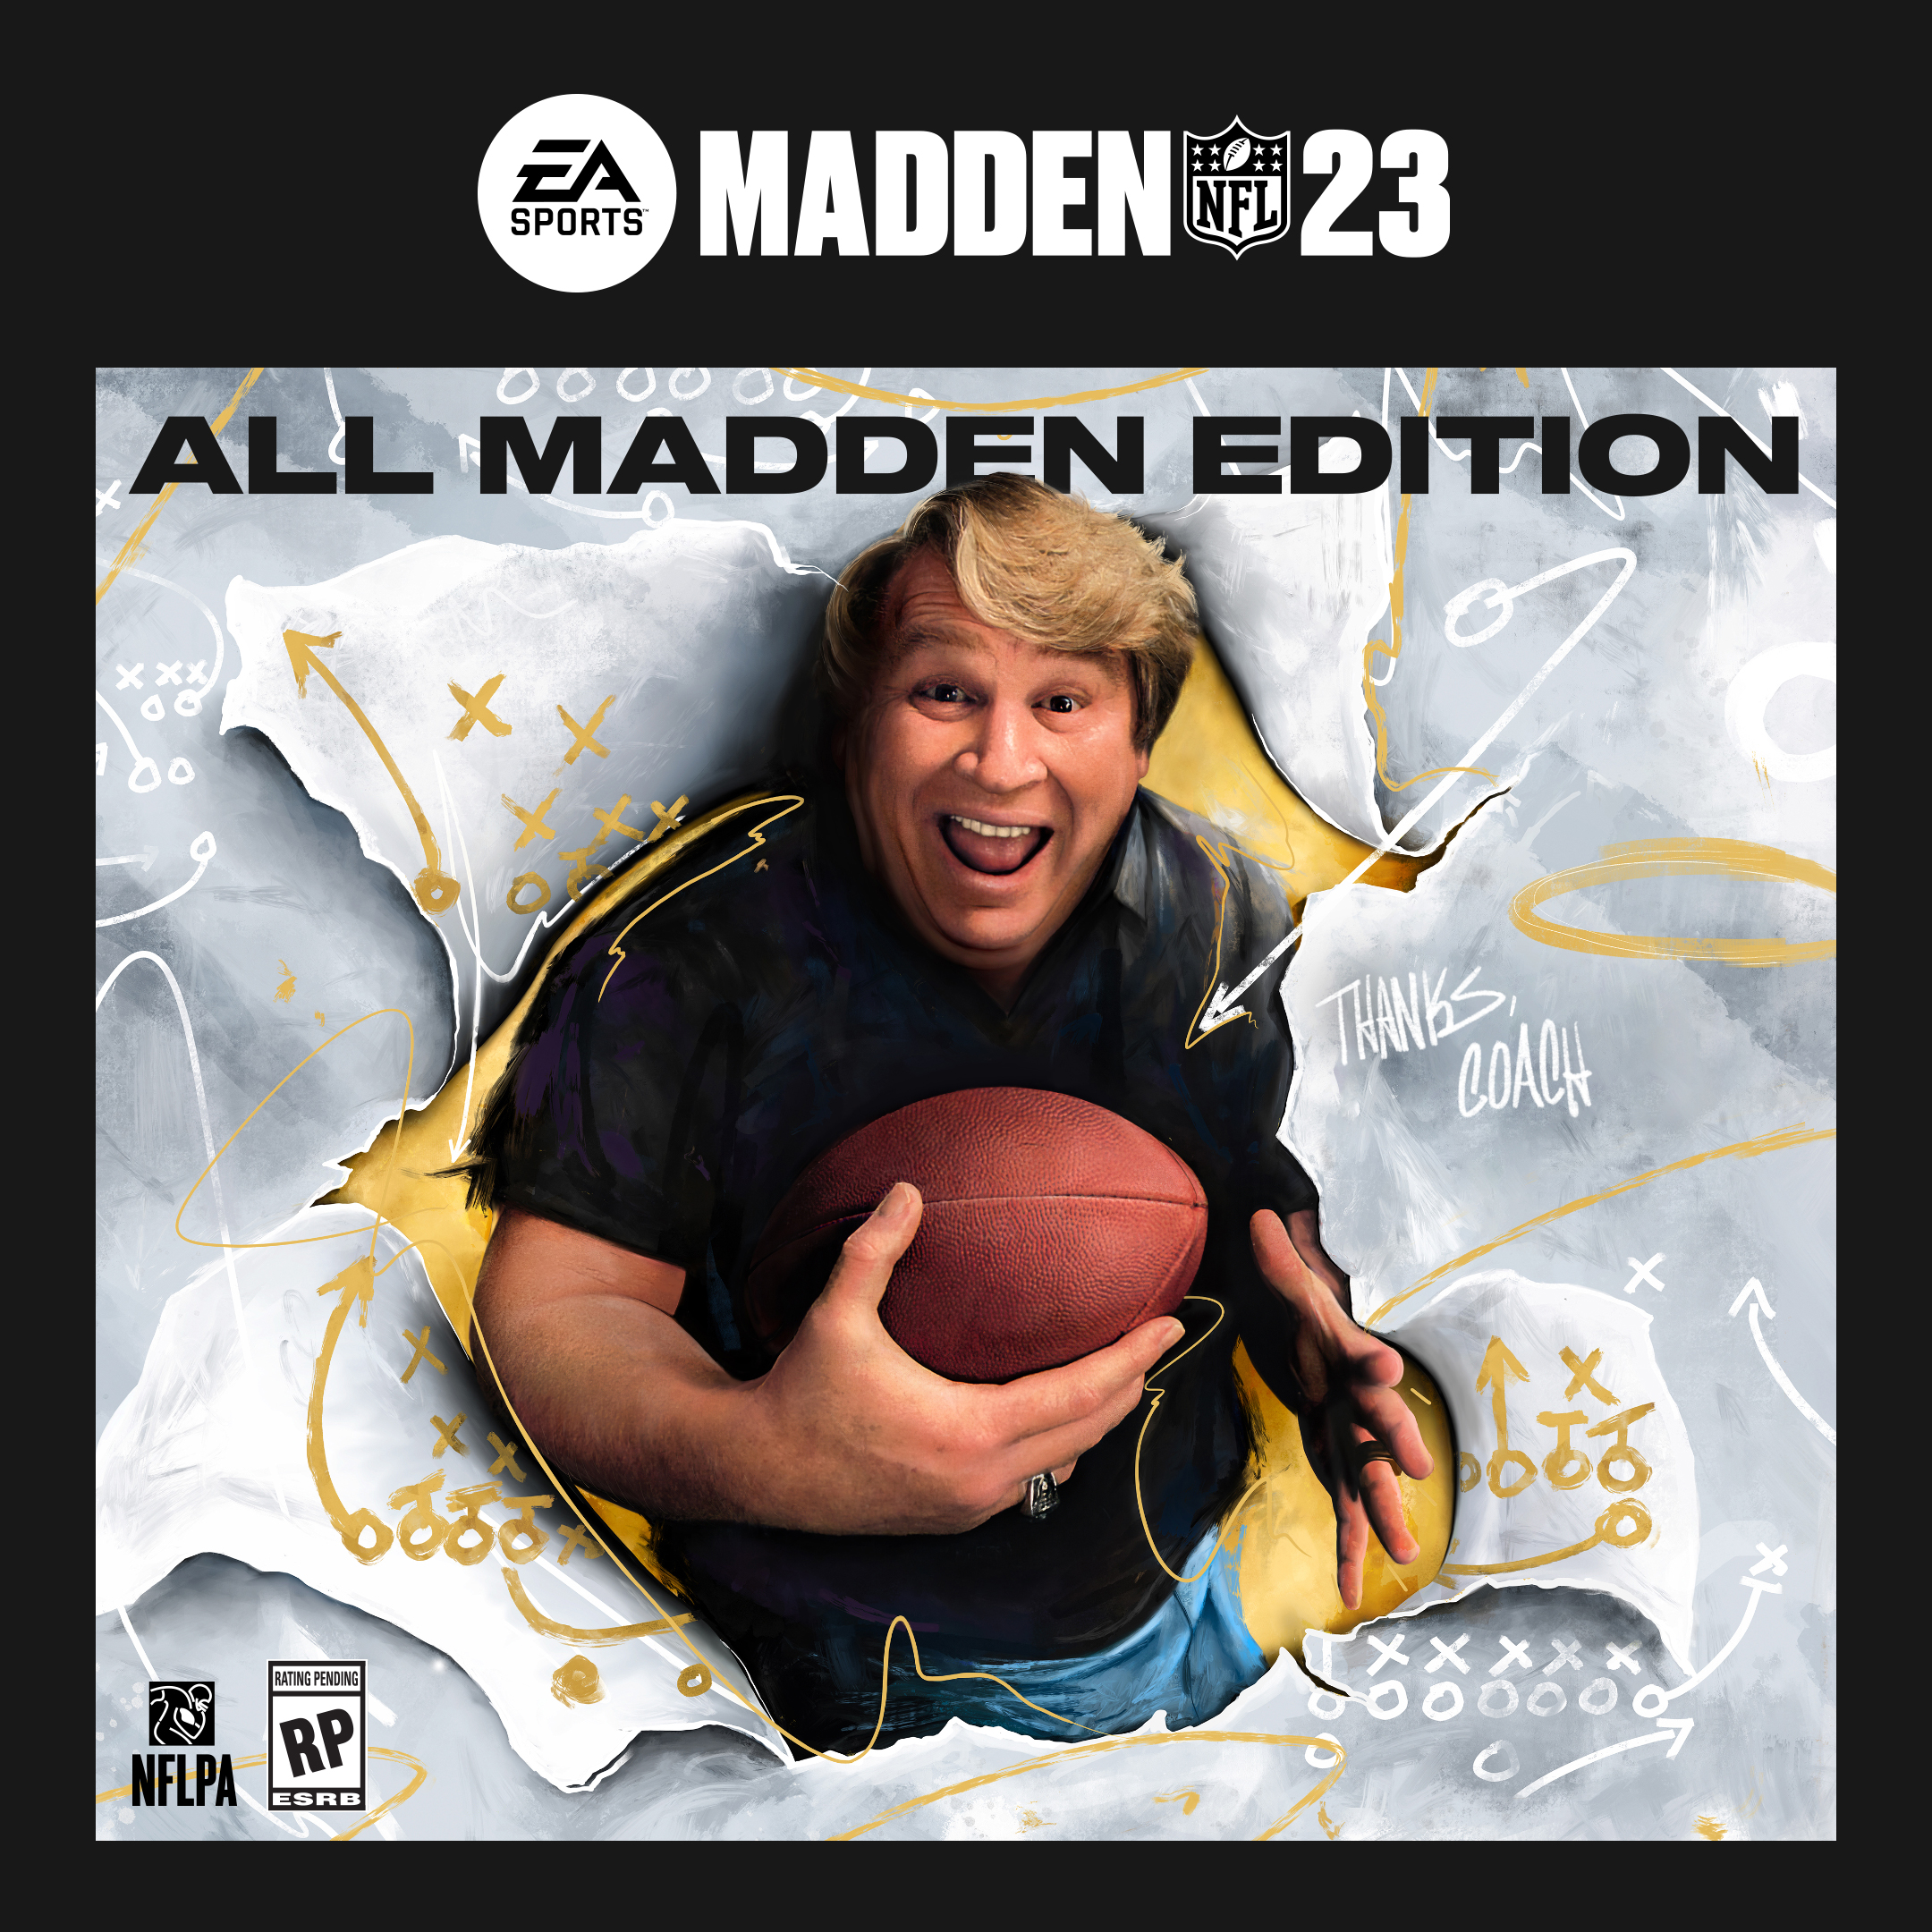 Madden NFL 24 on X: The #Madden23 cover… Coach‼️ Full reveal